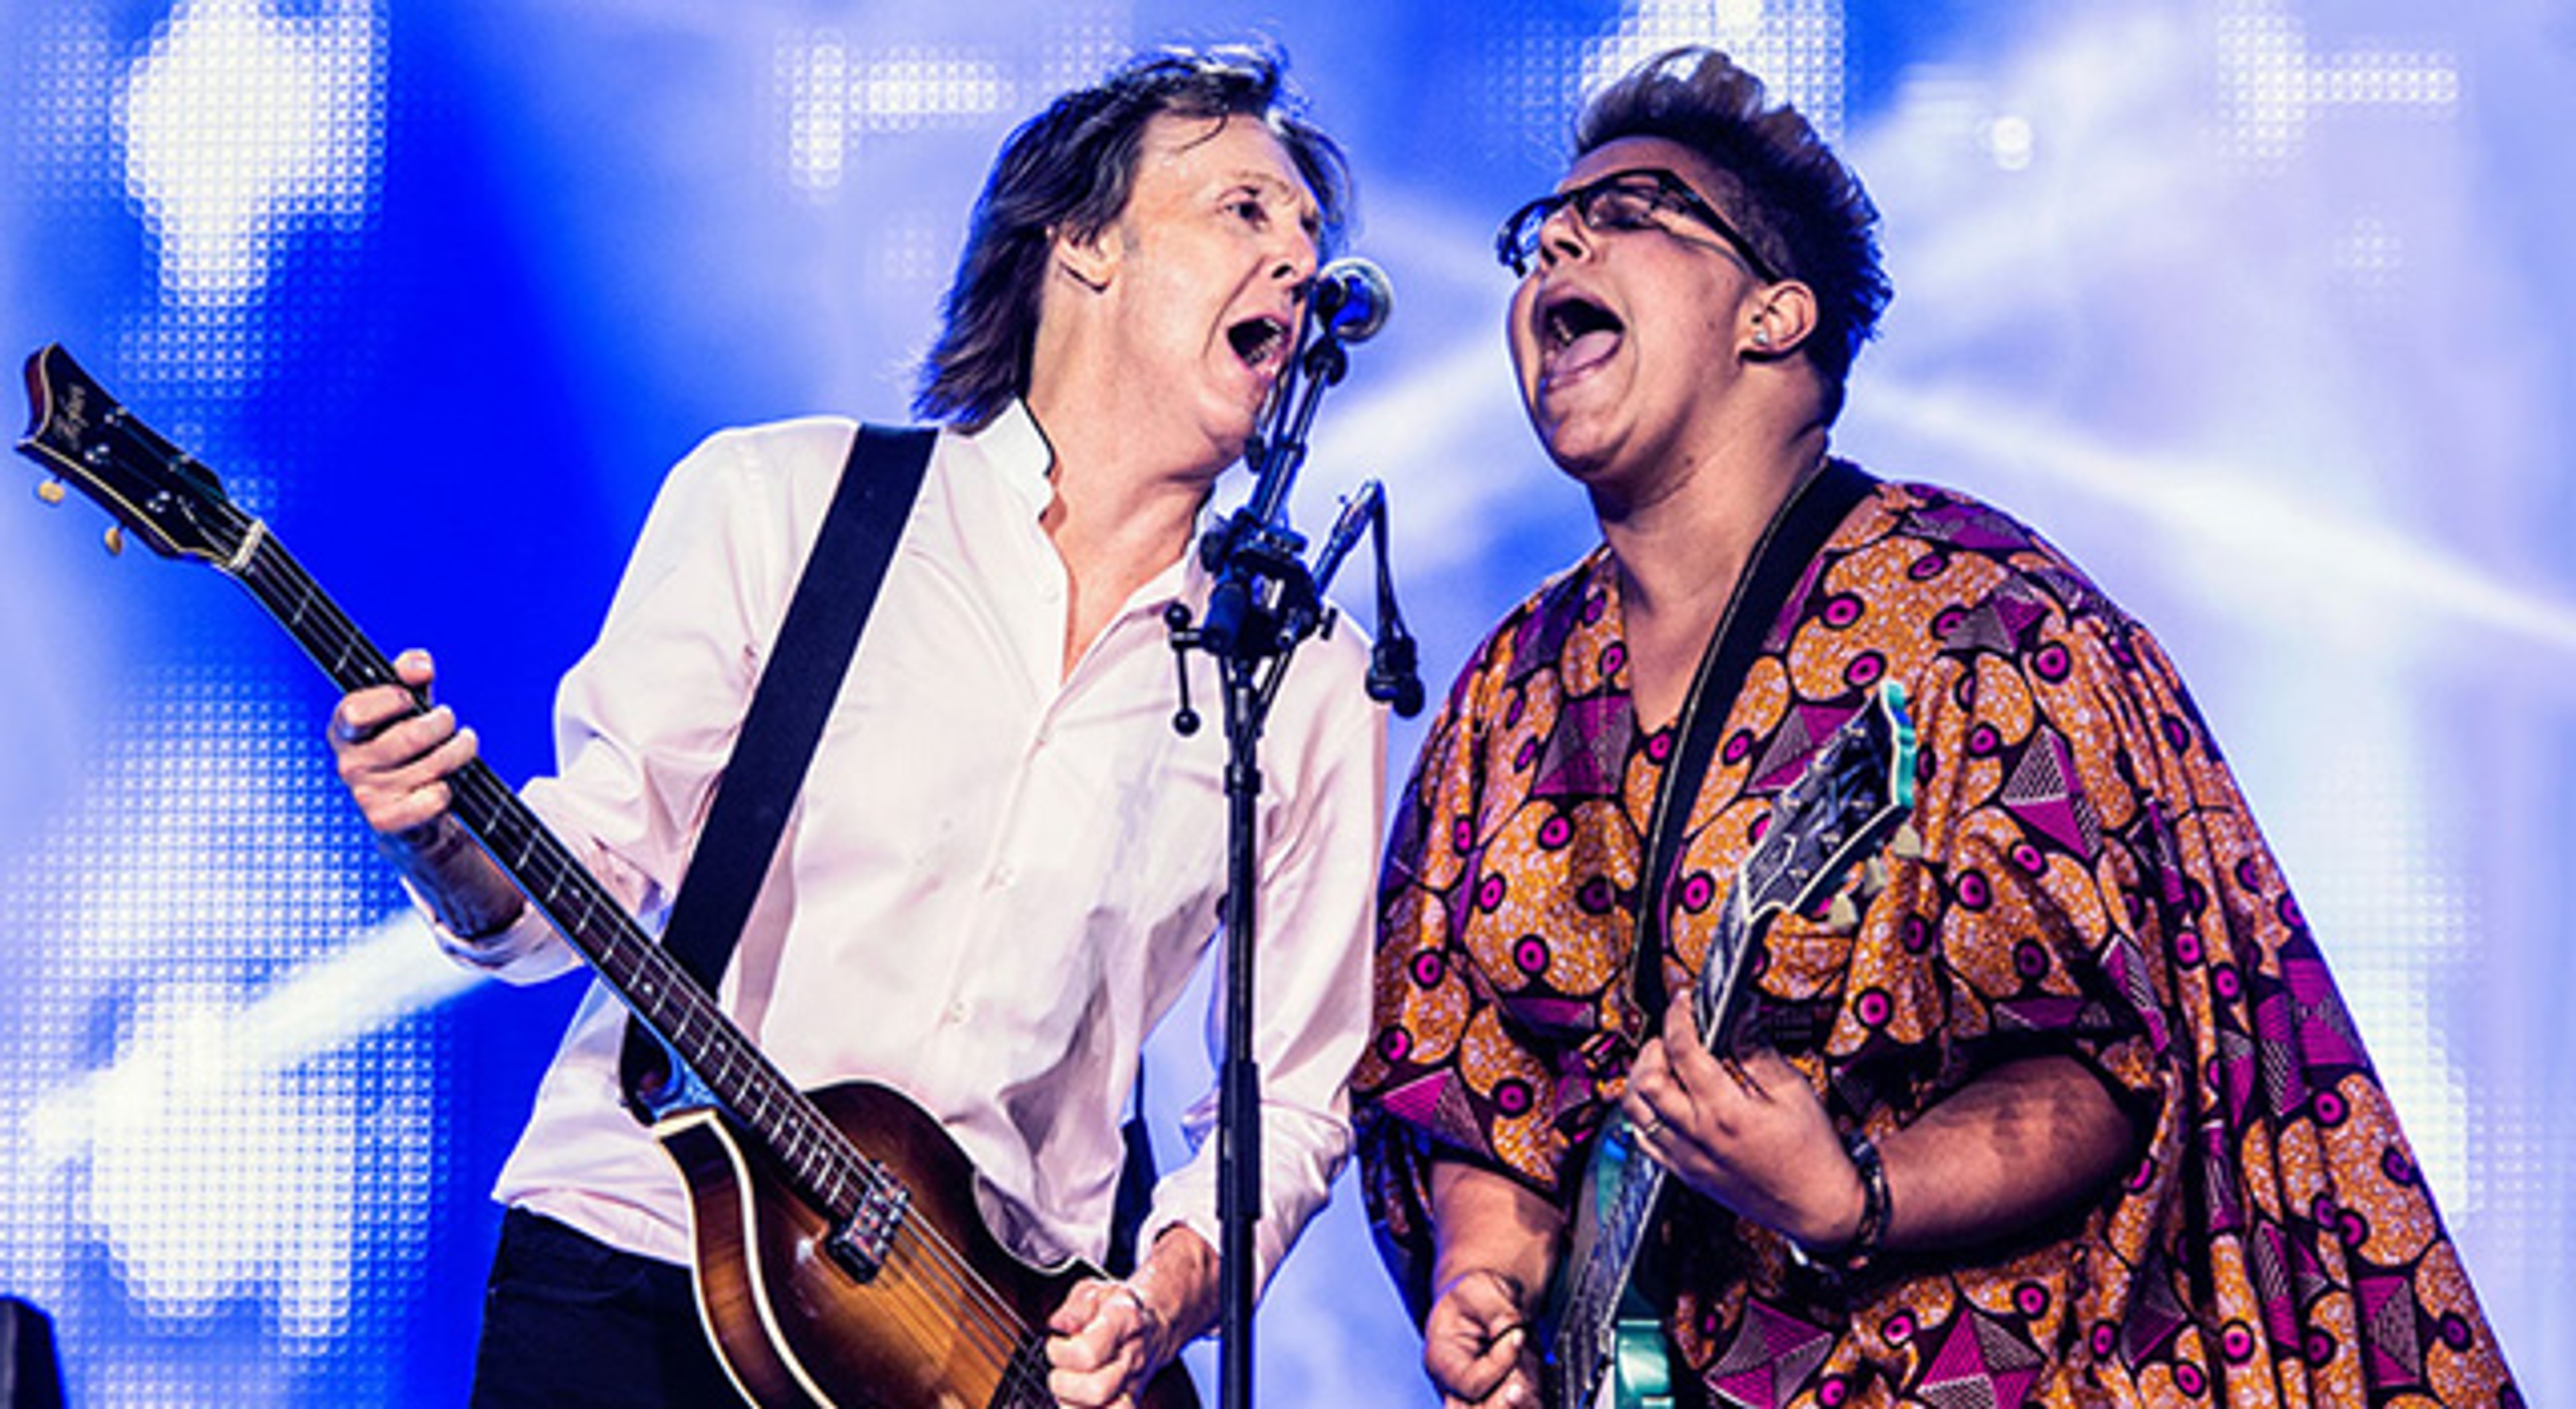 New Video: Paul Duets with Brittany Howard at Lollapalooza